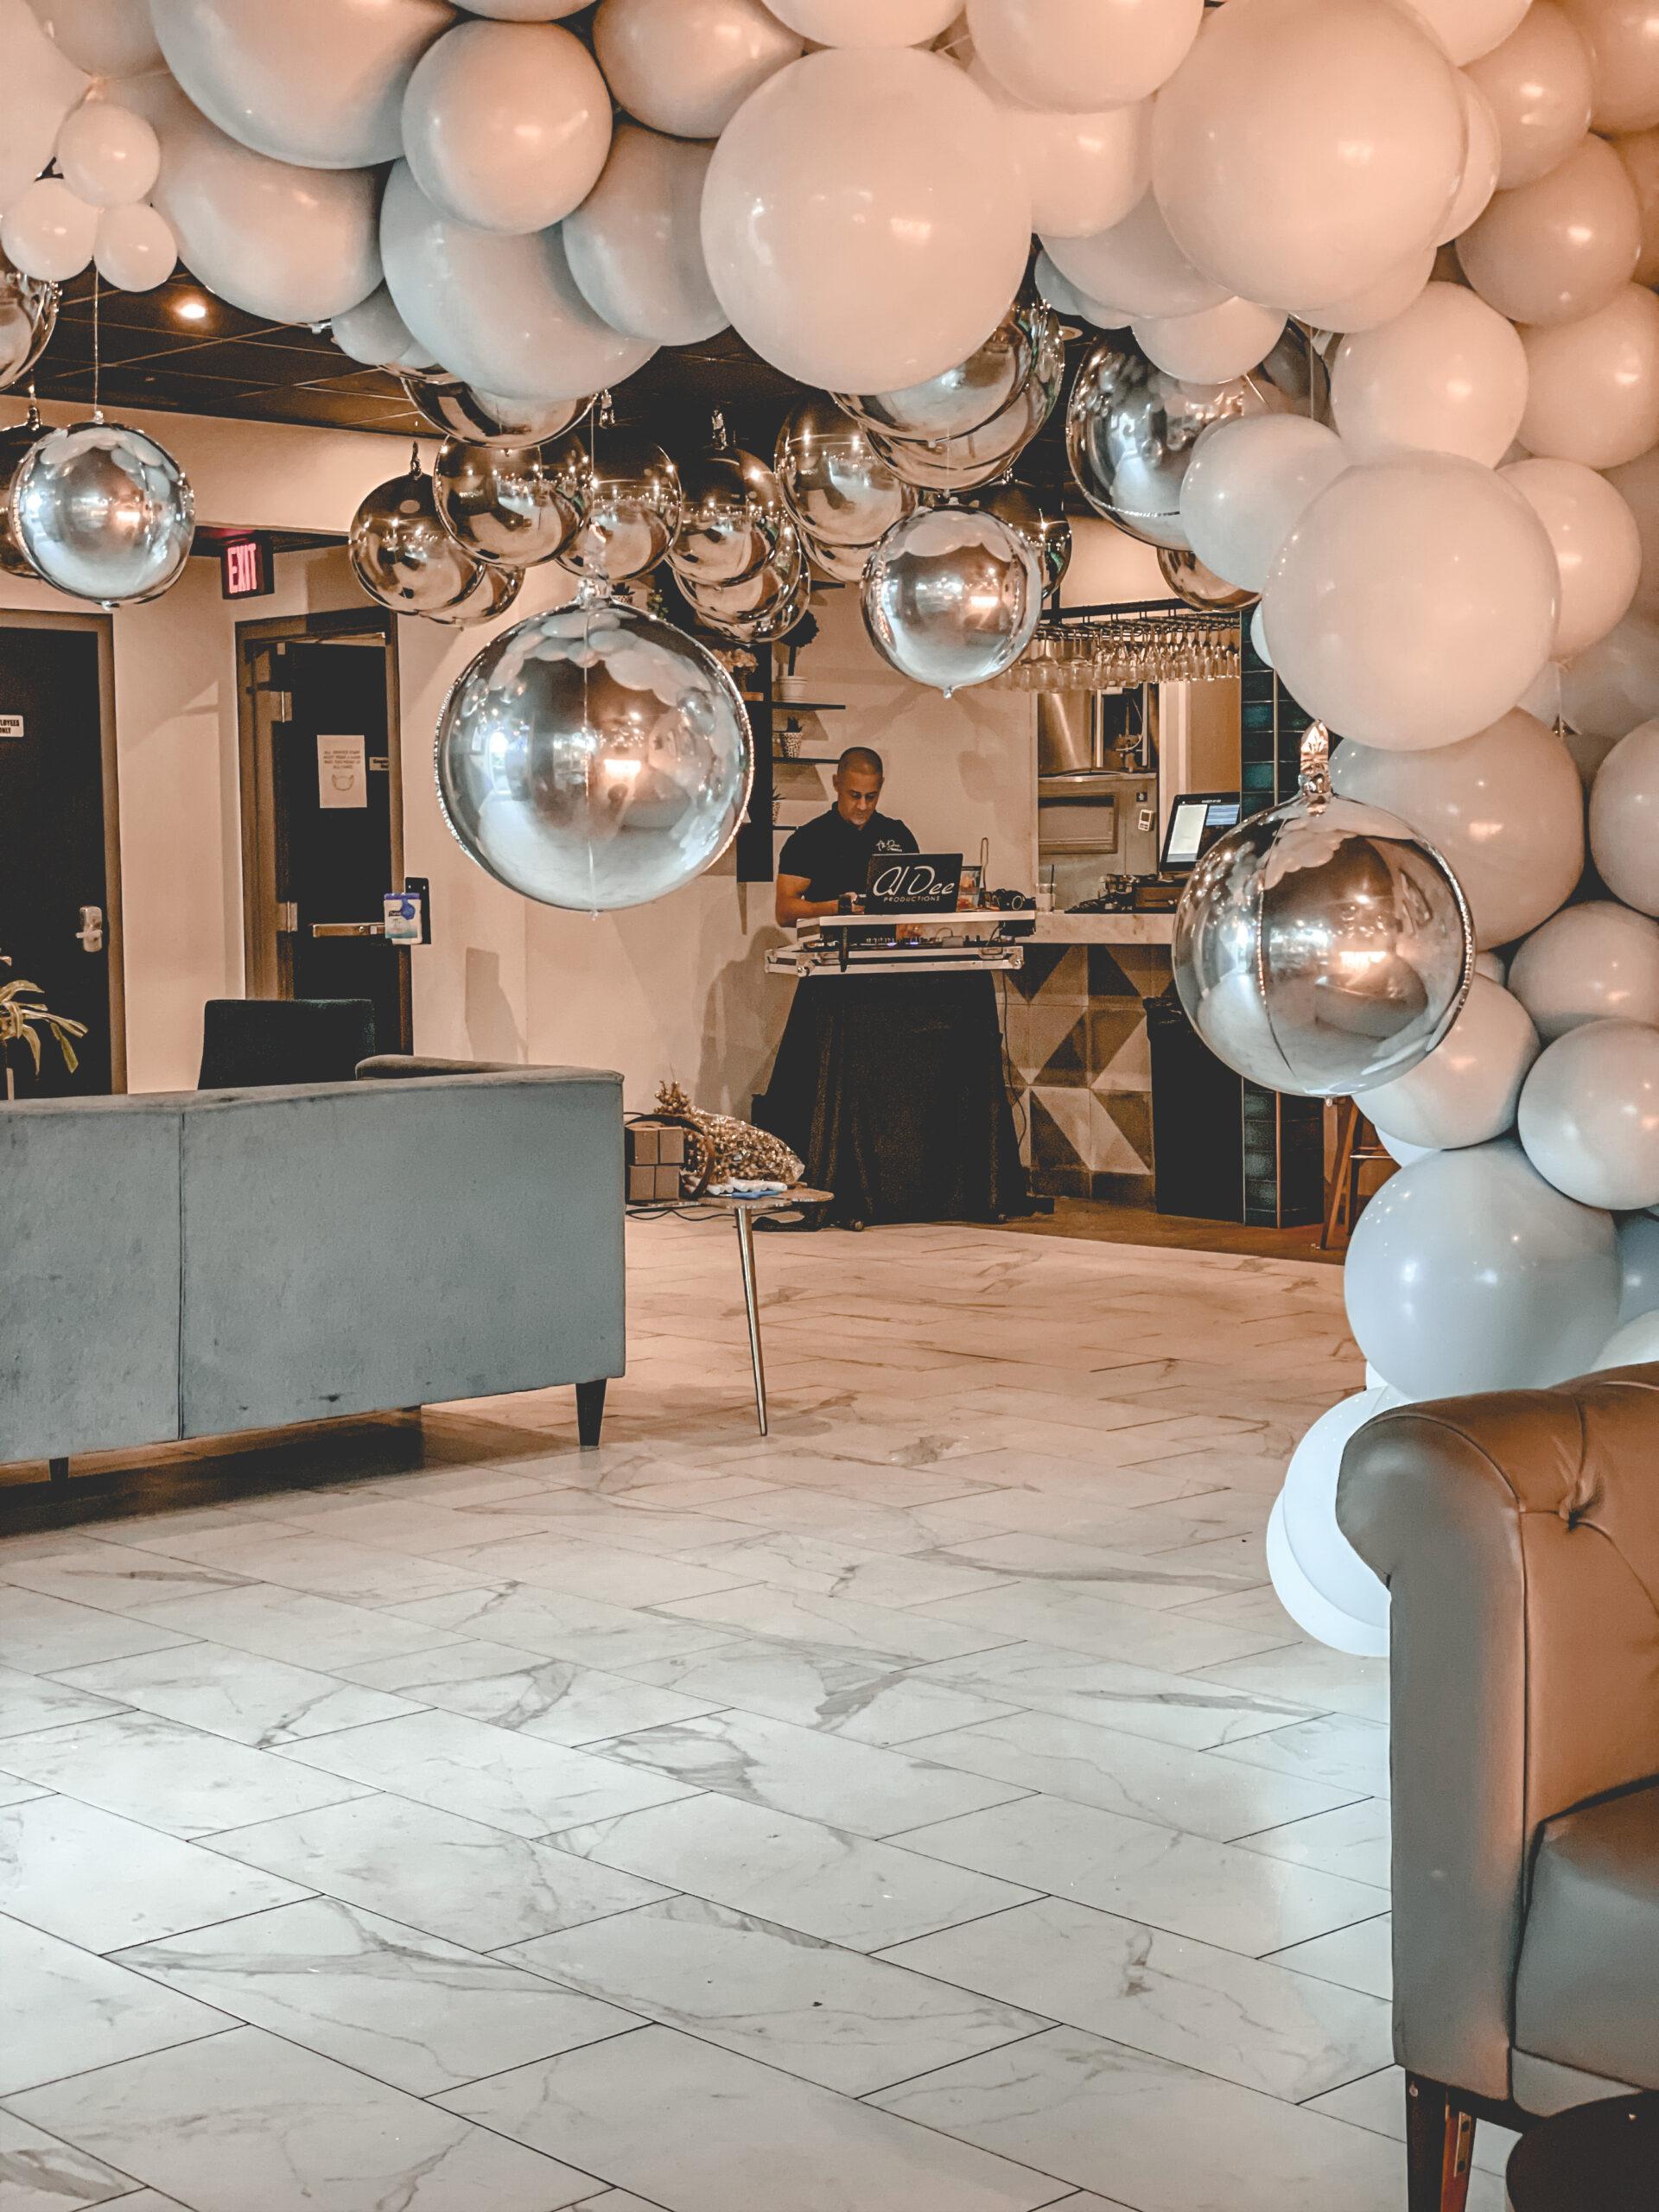 Corporate DJ and Balloons - Corporate Event Planned and Designed by L'élite Events